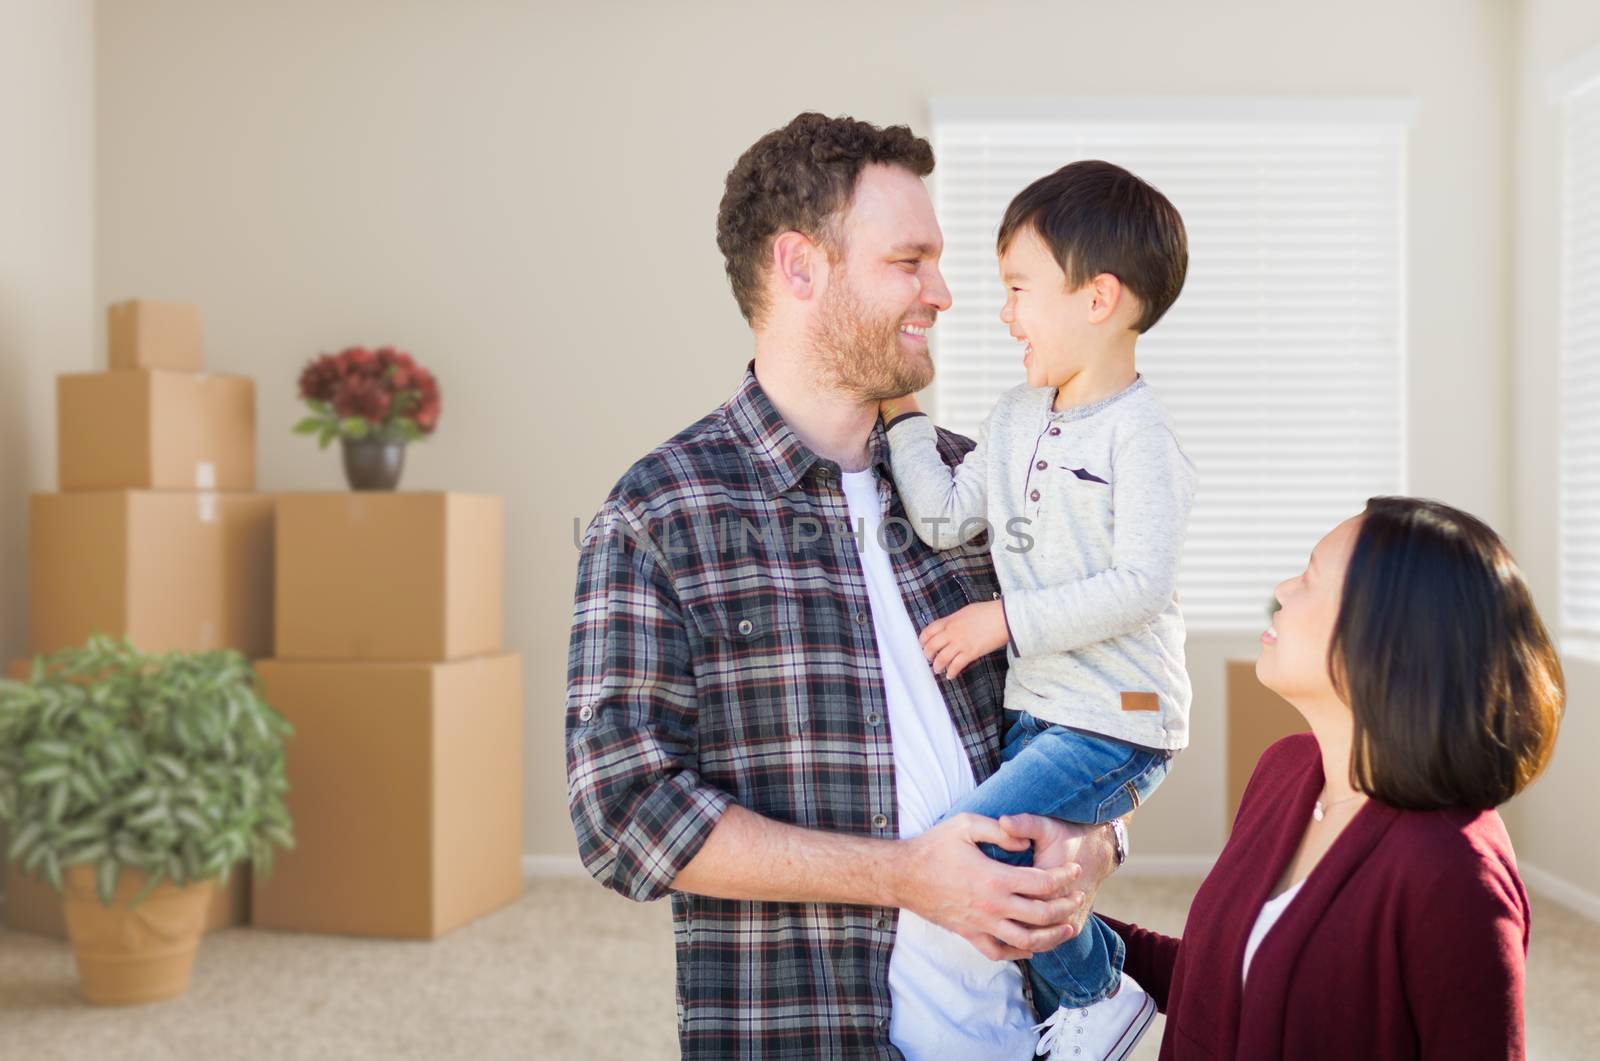 Young Mixed Race Caucasian and Chinese Family Inside Empty Room with Moving Boxes.